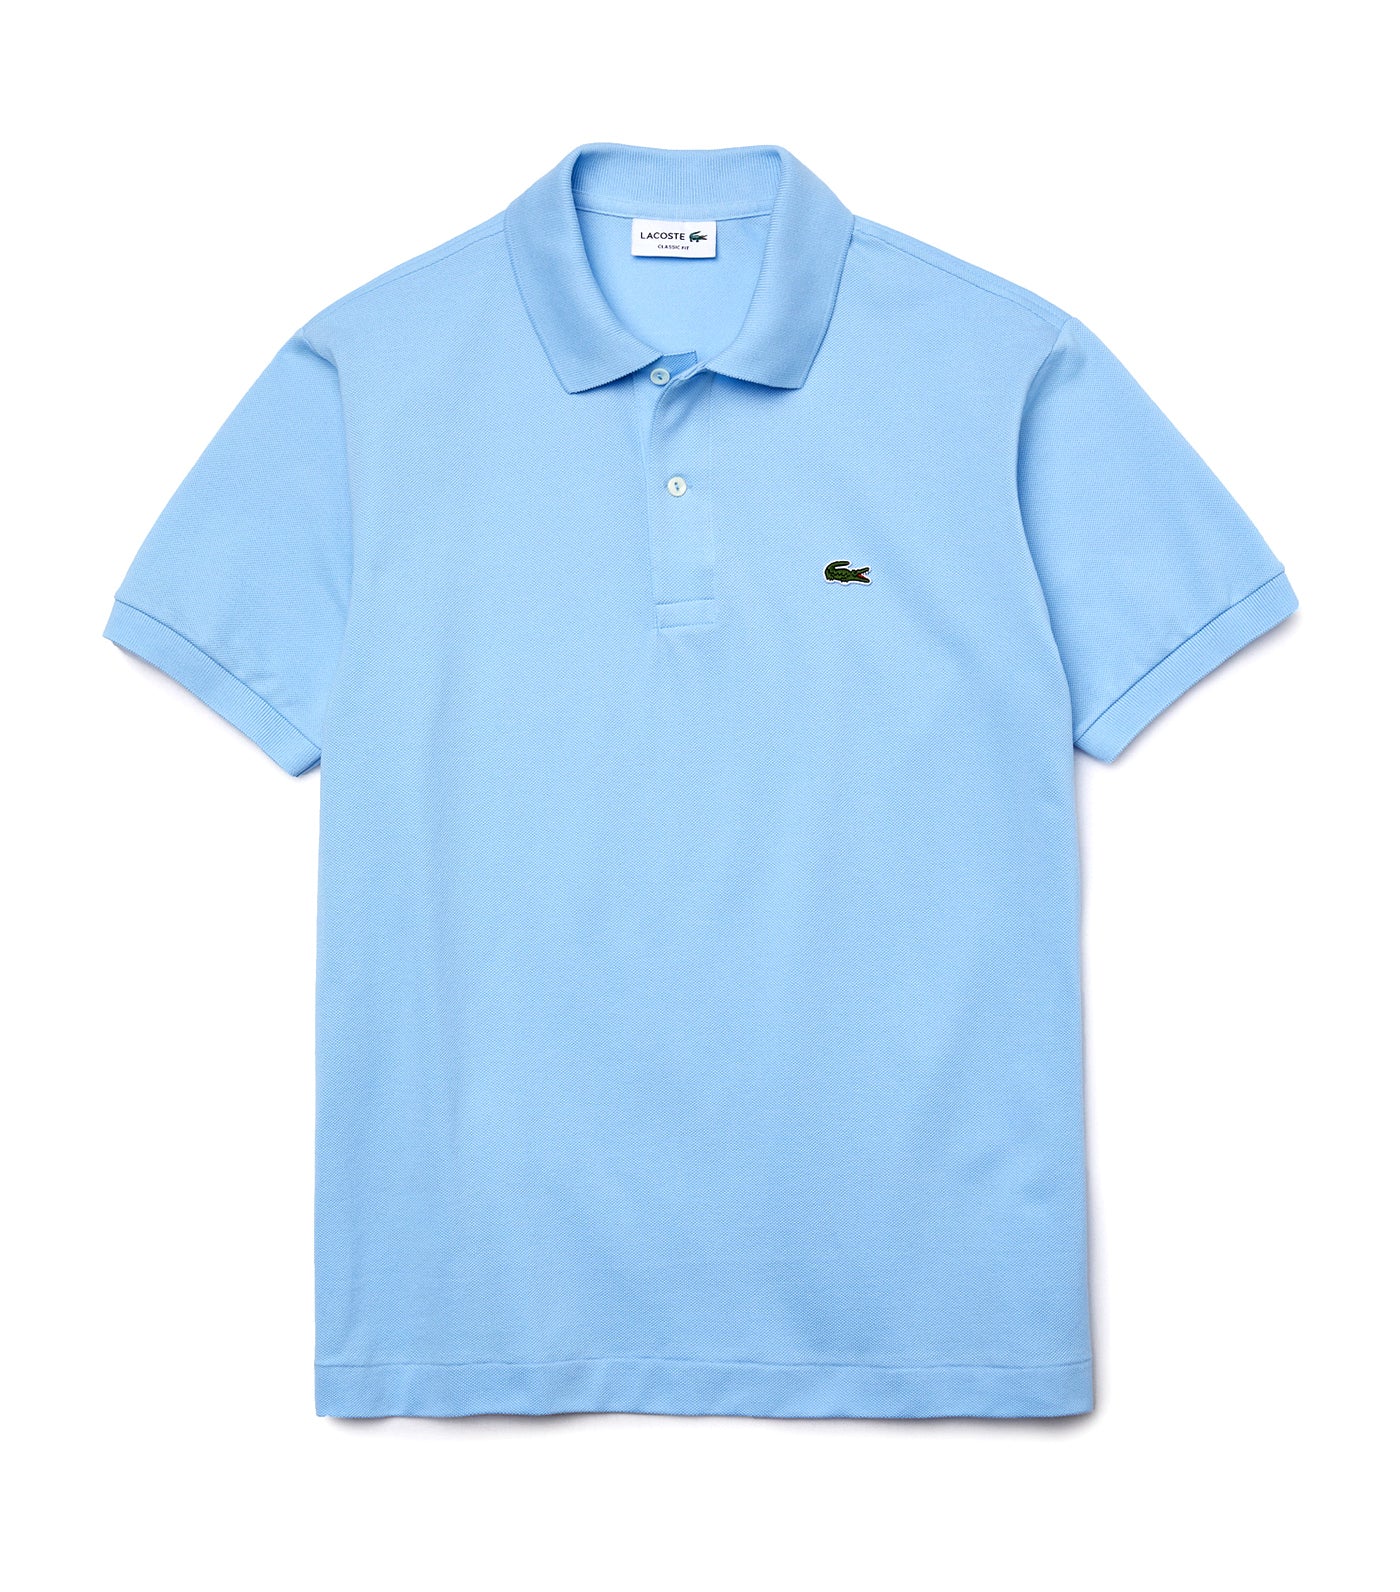 Lacoste L.12.12 Polo Shirt Overview